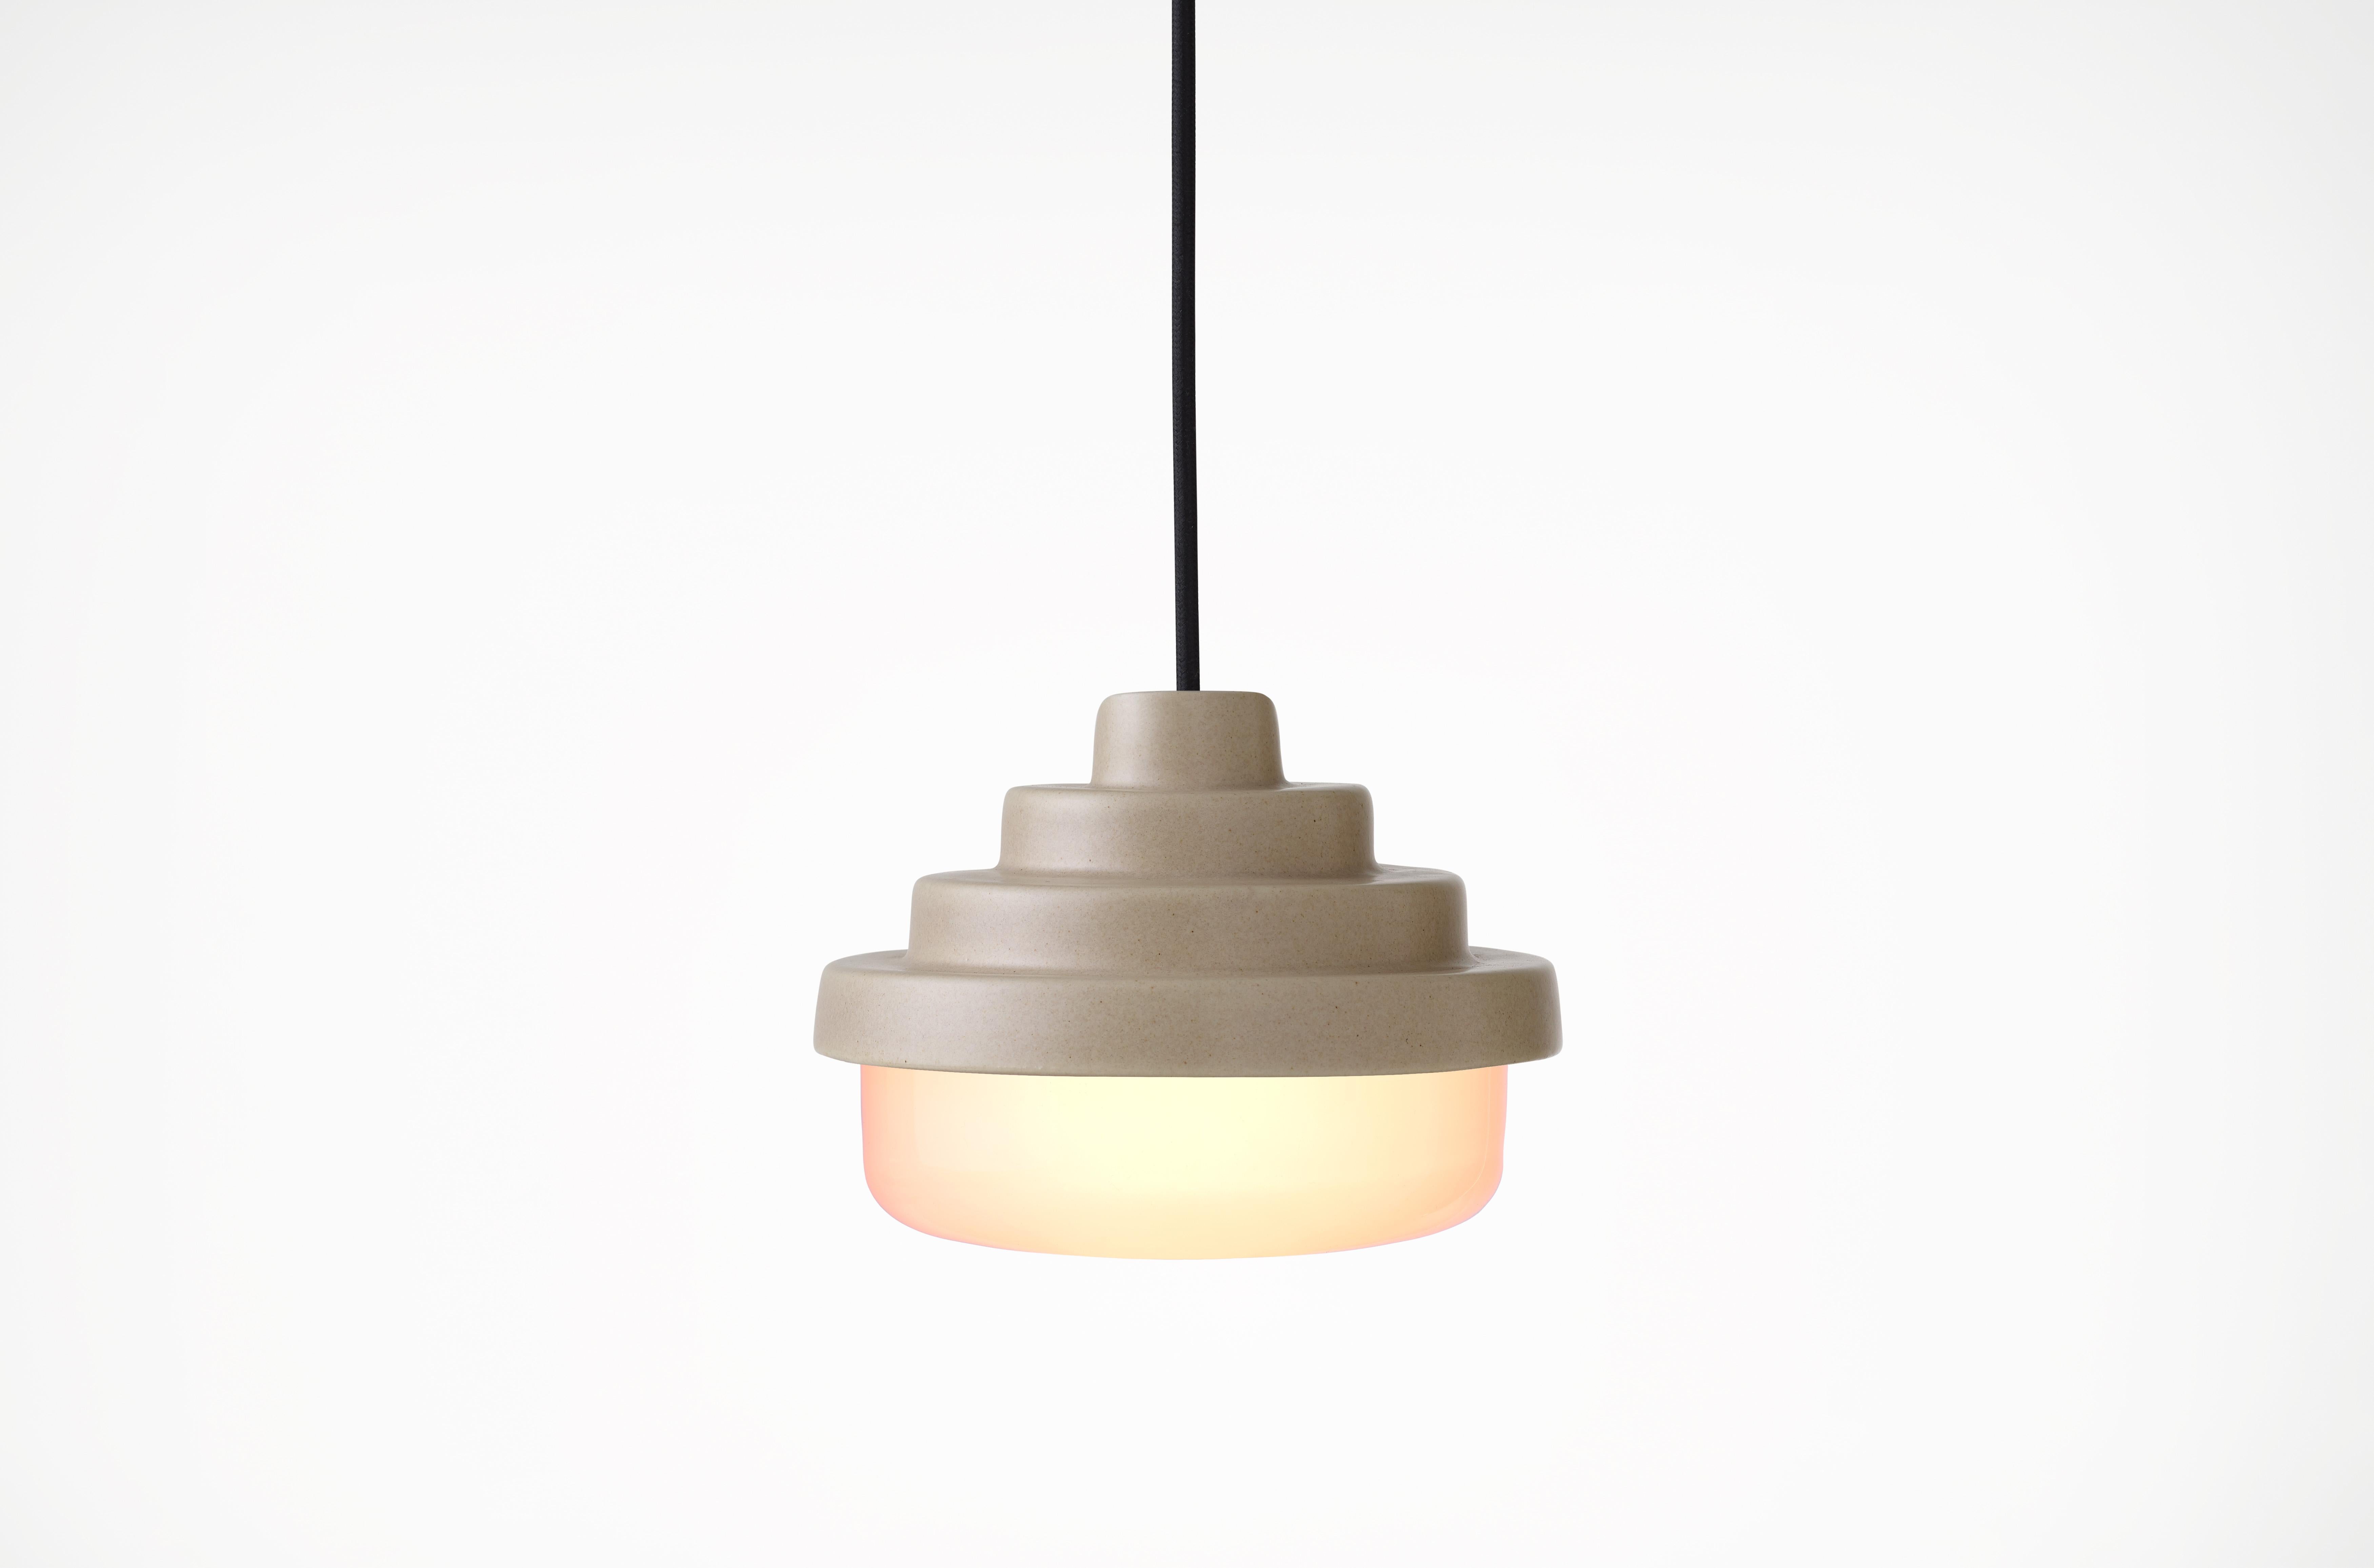 Earth and White Honey Pendant Light by Coco Flip
Dimensions: D 18 x W 18 x H 13 cm
Materials: Slip cast ceramic stoneware with blown glass. 
Weight: Approx. 2kg
Glass finishes: White.
Ceramic finishes: Earth satin glaze. 

Standard fixtures